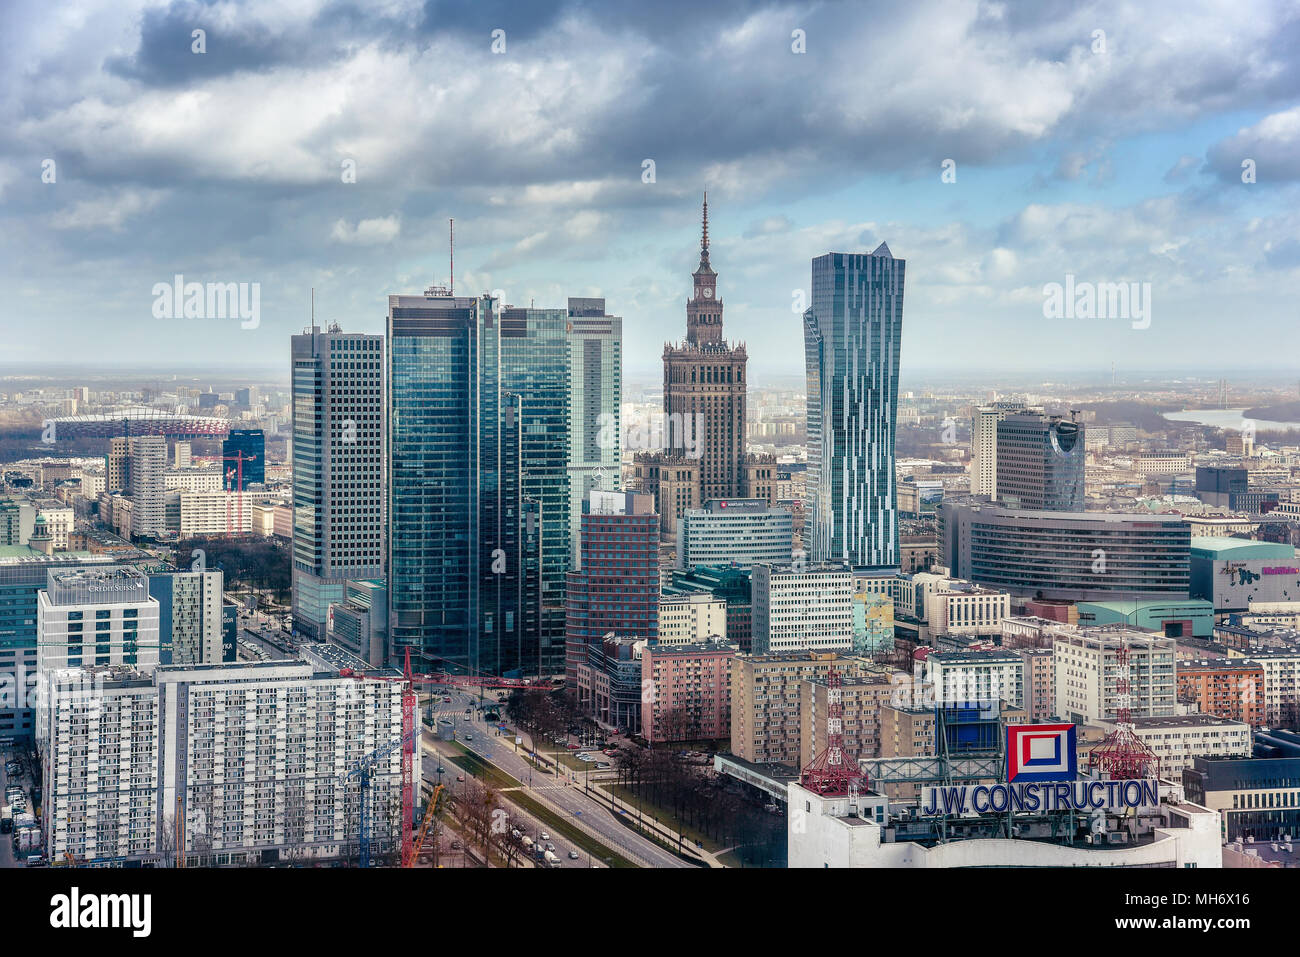 Warsaw / Poland - 03.16.2017: Panoramic view at city center with a variety of architecture styles. Stock Photo